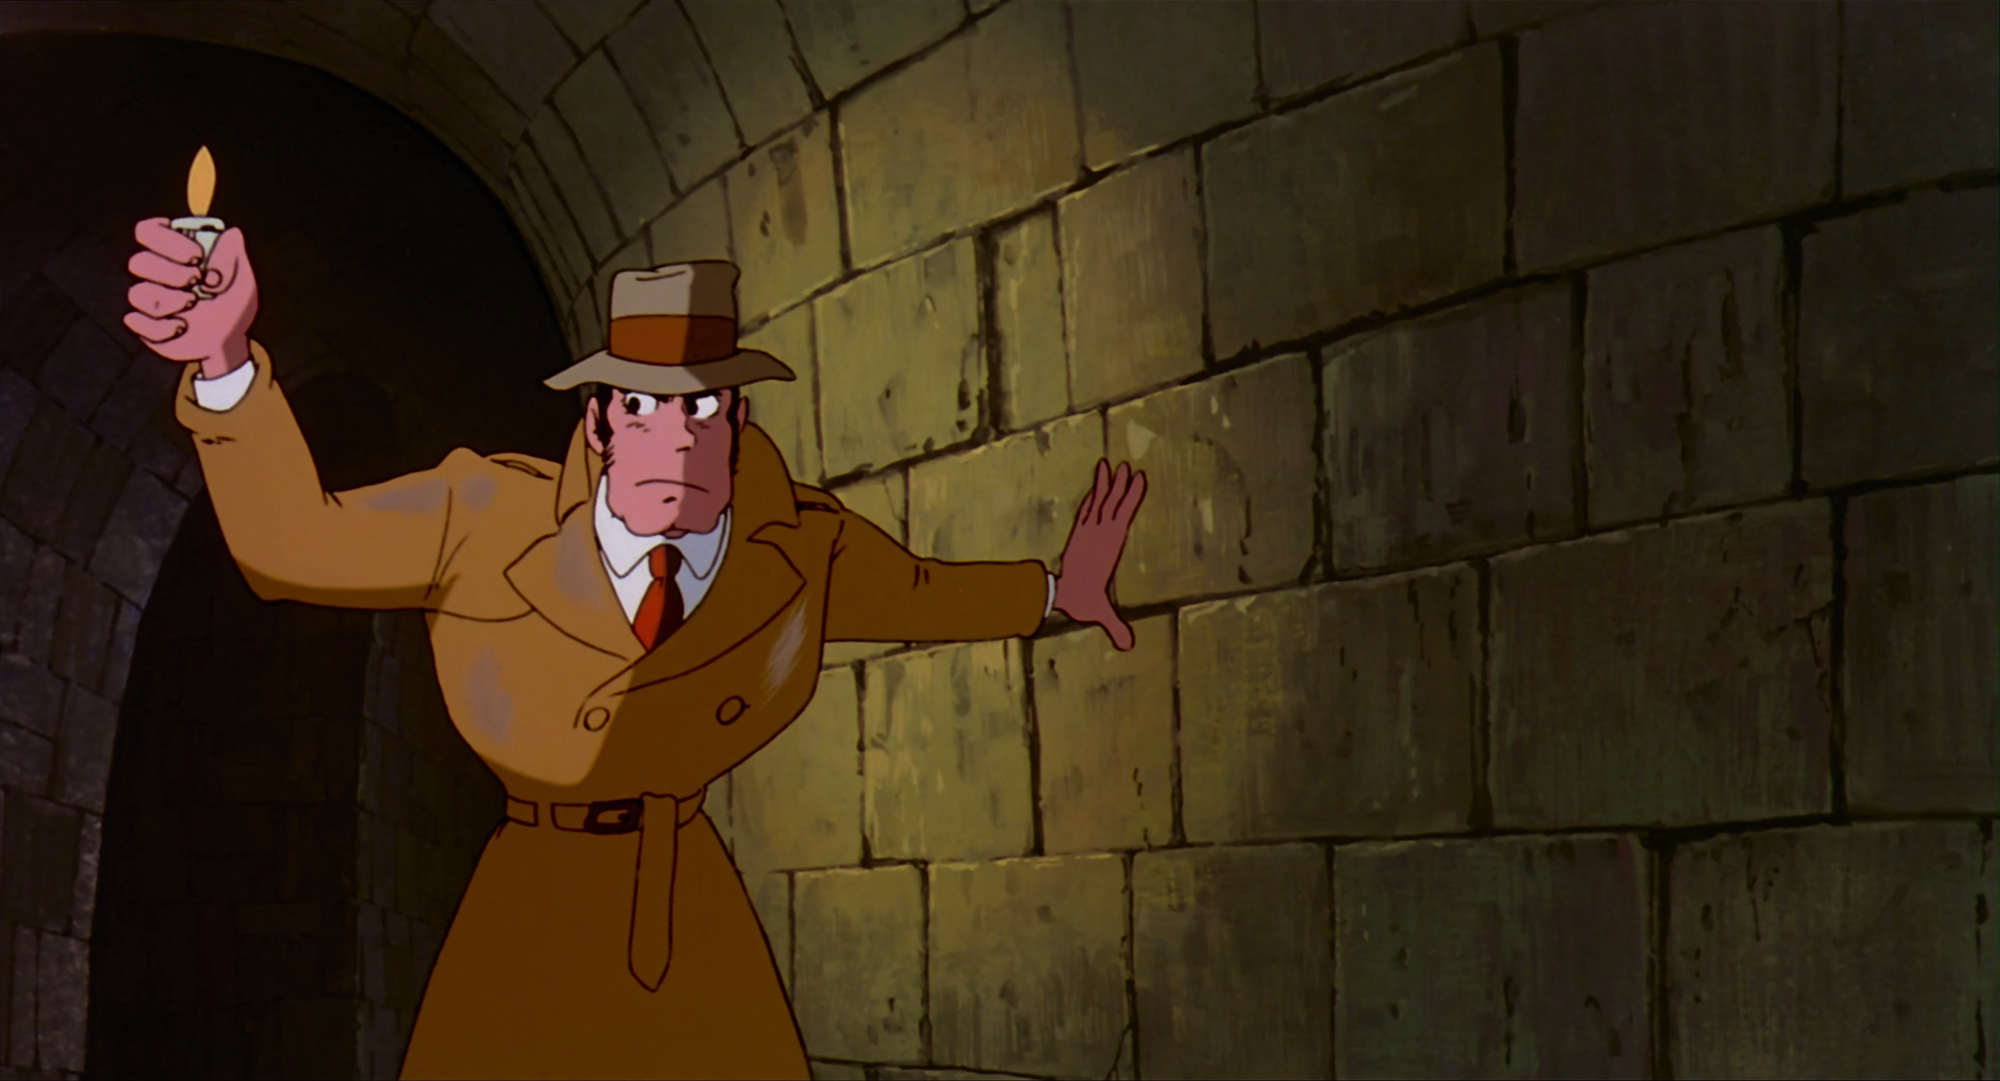 Lupin_Still_50.18.02.png